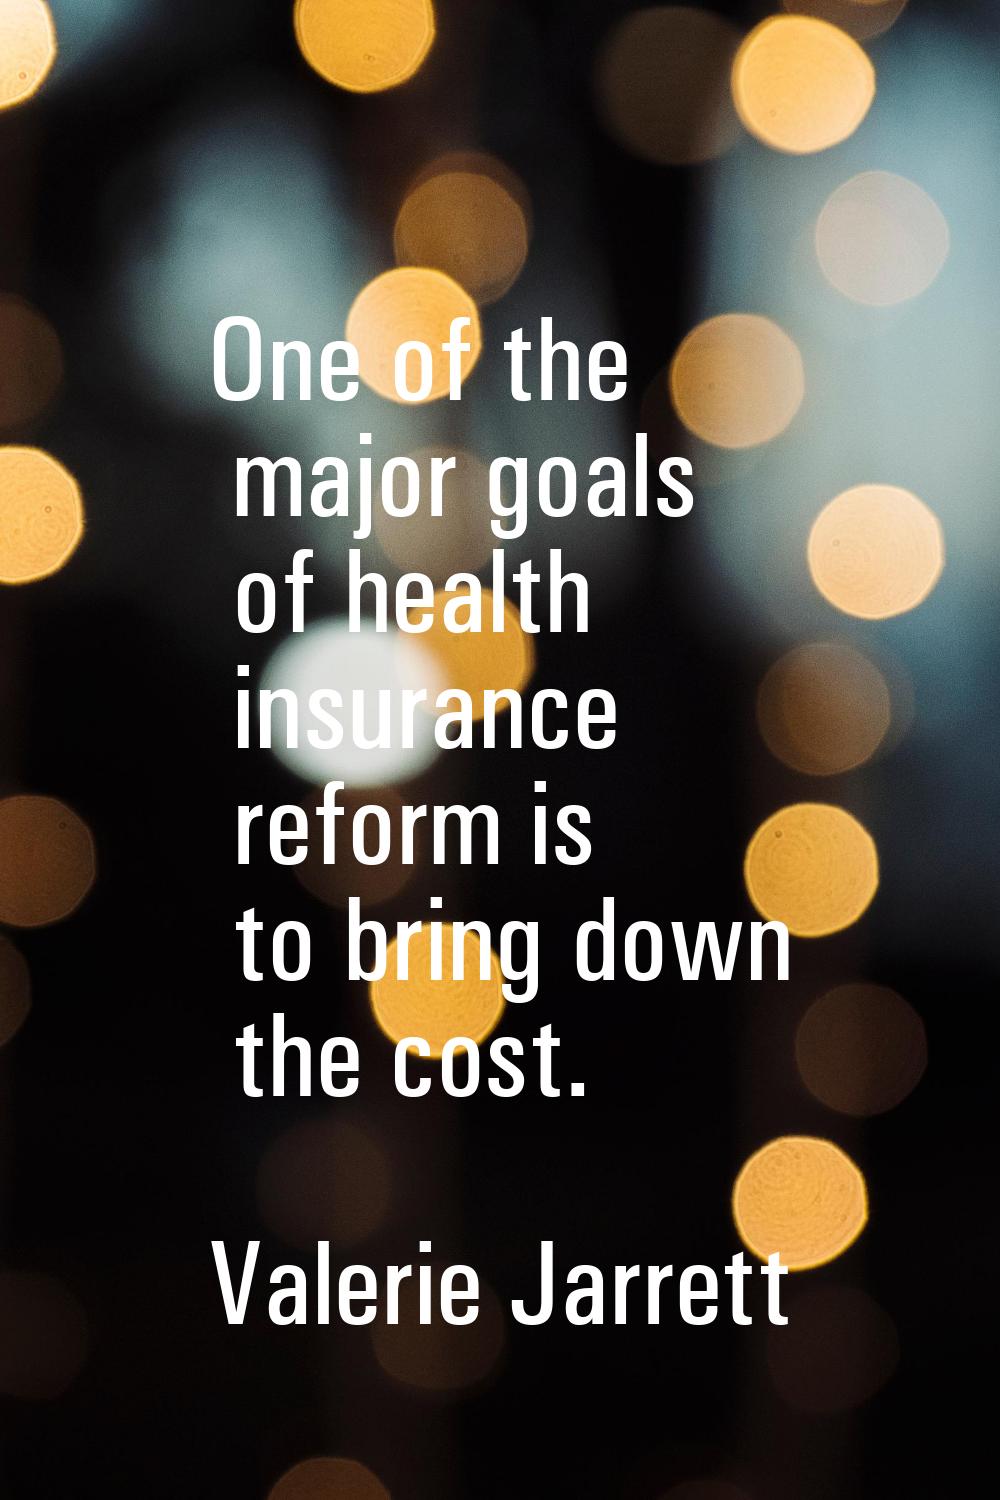 One of the major goals of health insurance reform is to bring down the cost.